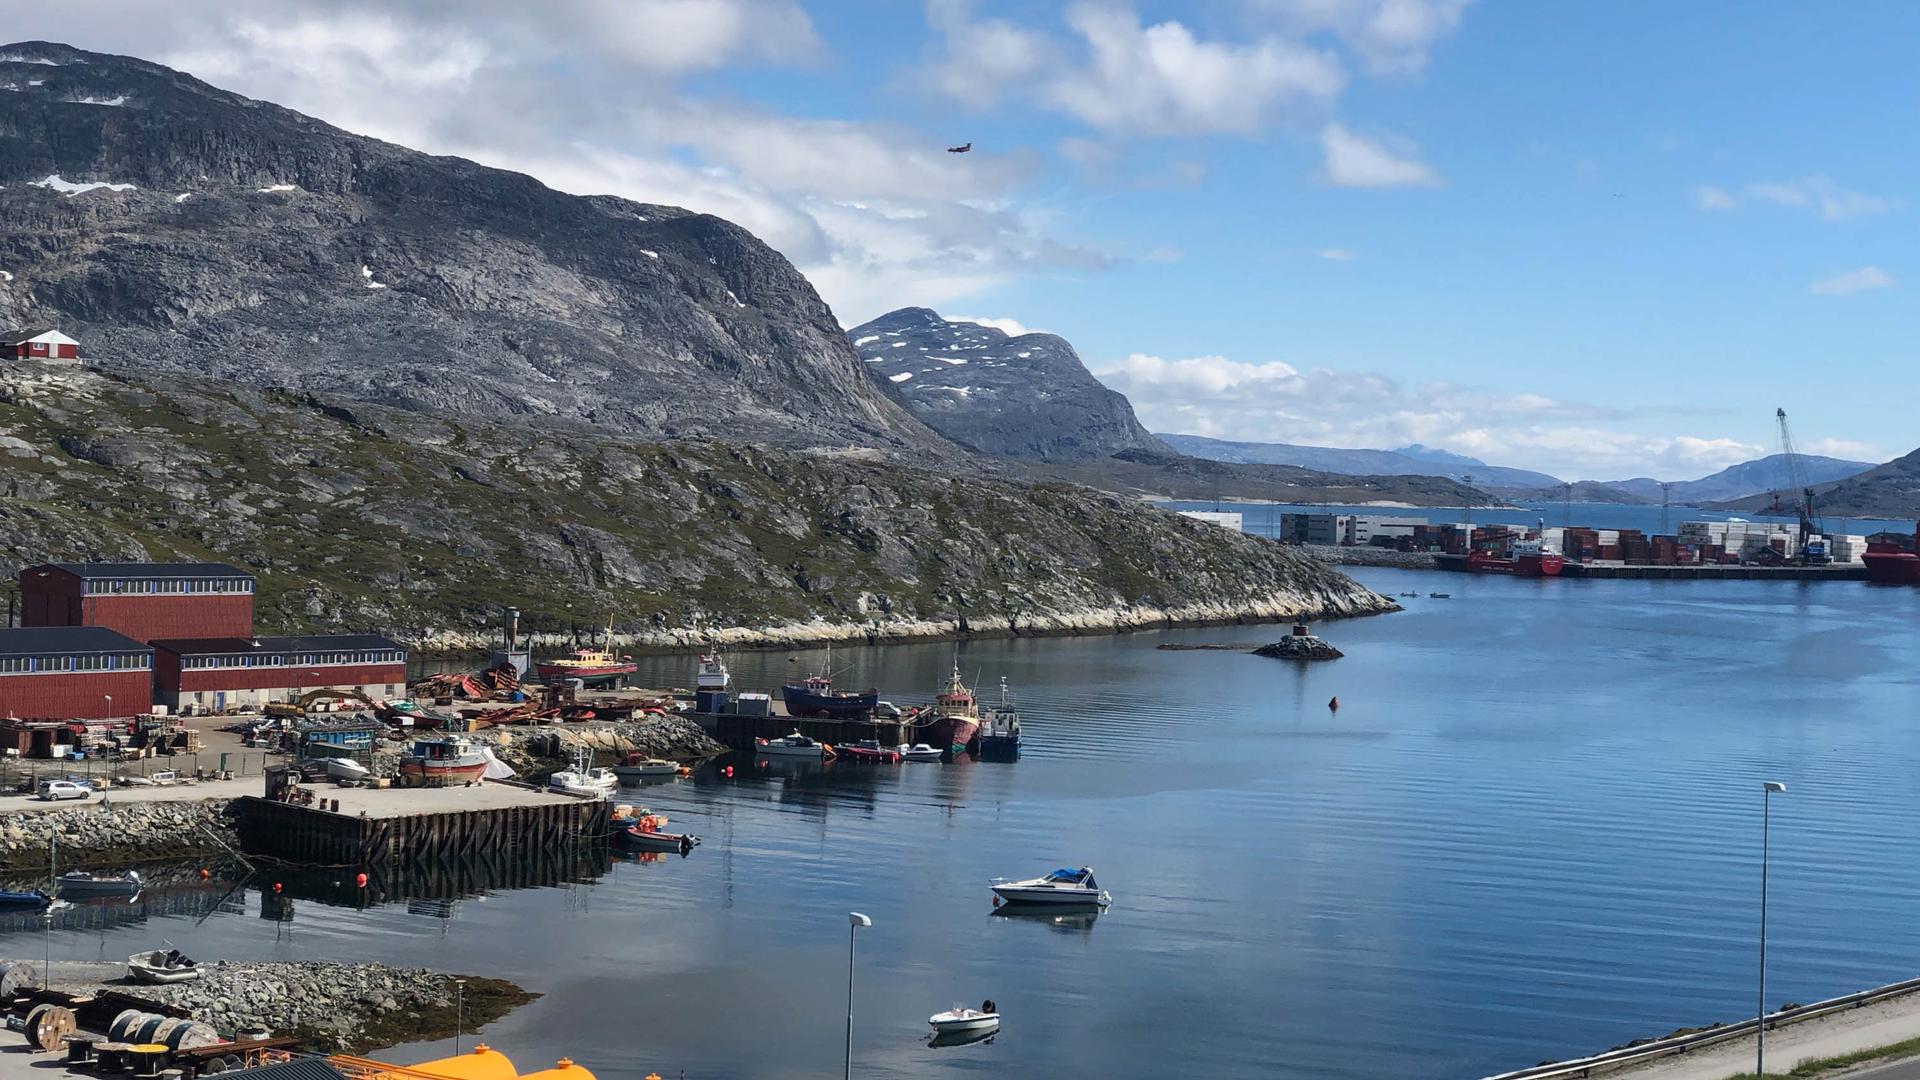 The harbor of Nuuk, Greenland's capital.